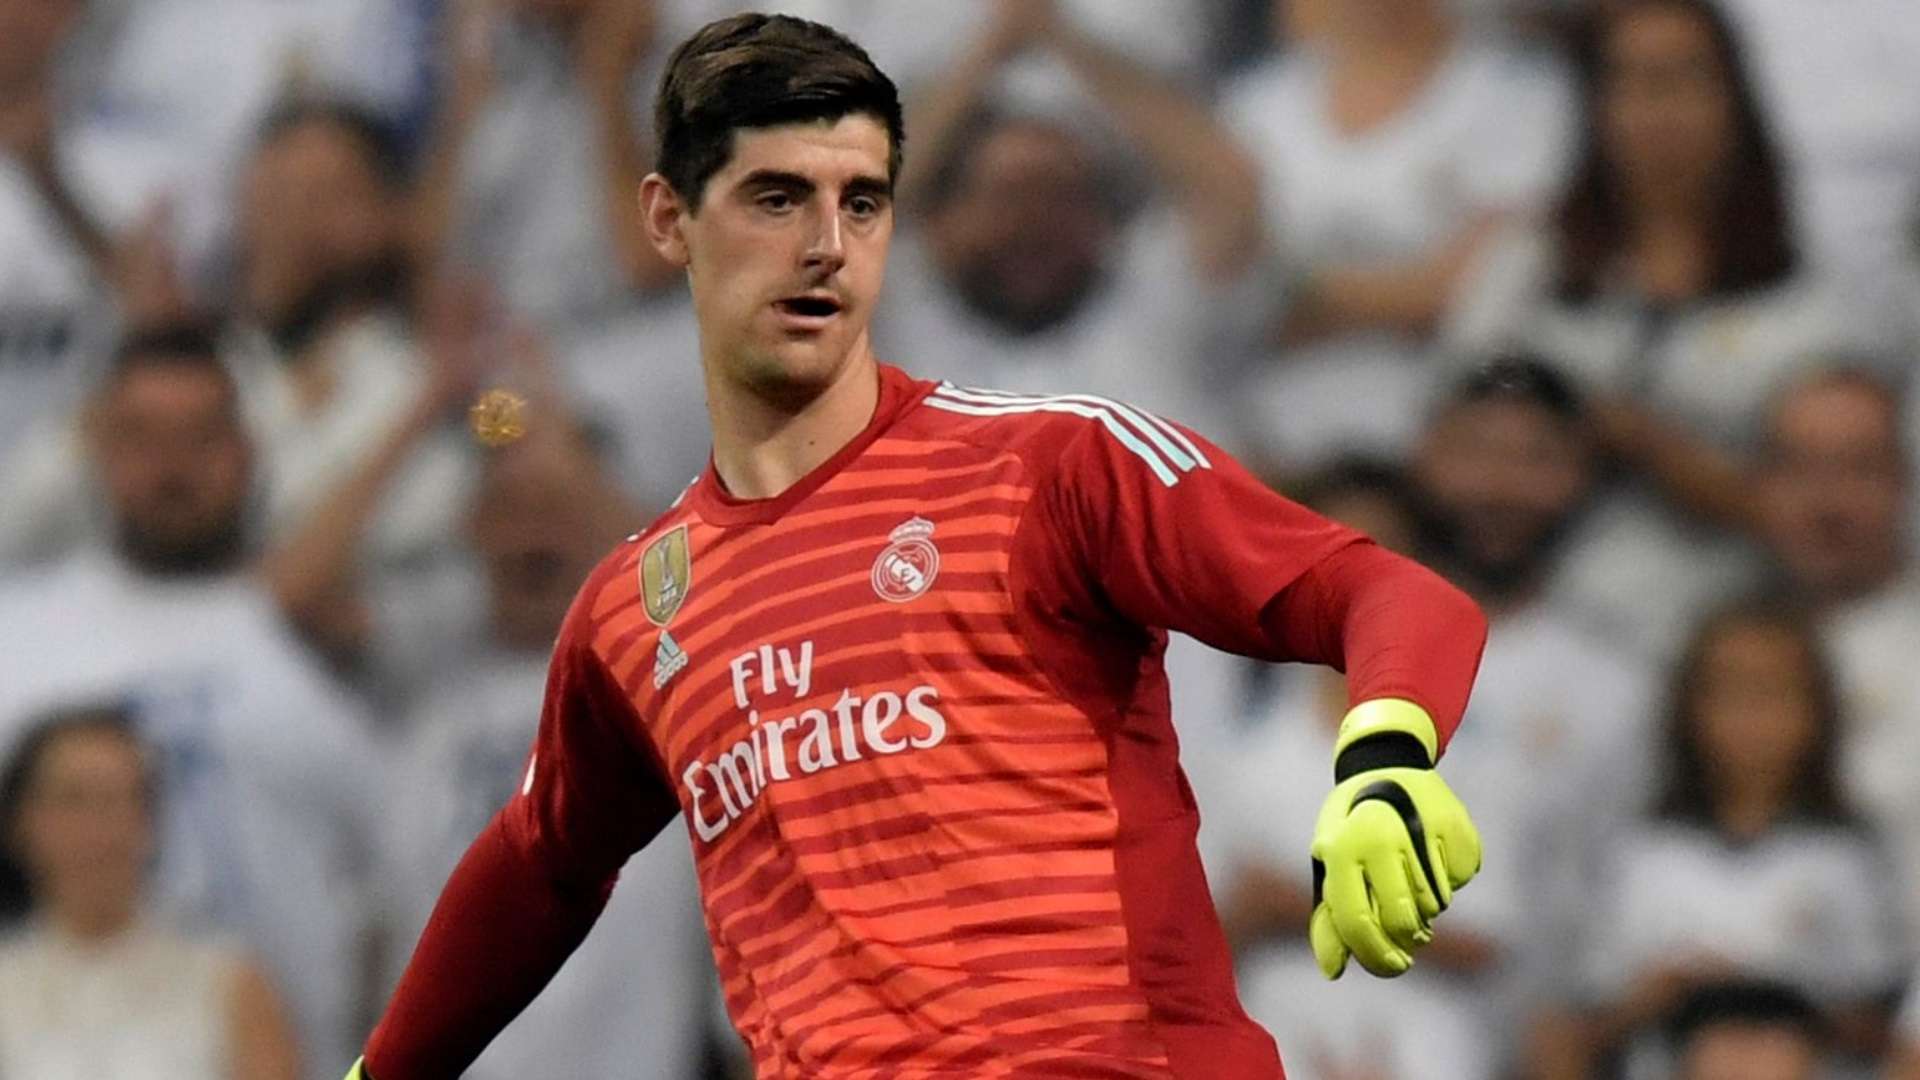 Courtois Real Madrid Leganes 02 09 2018